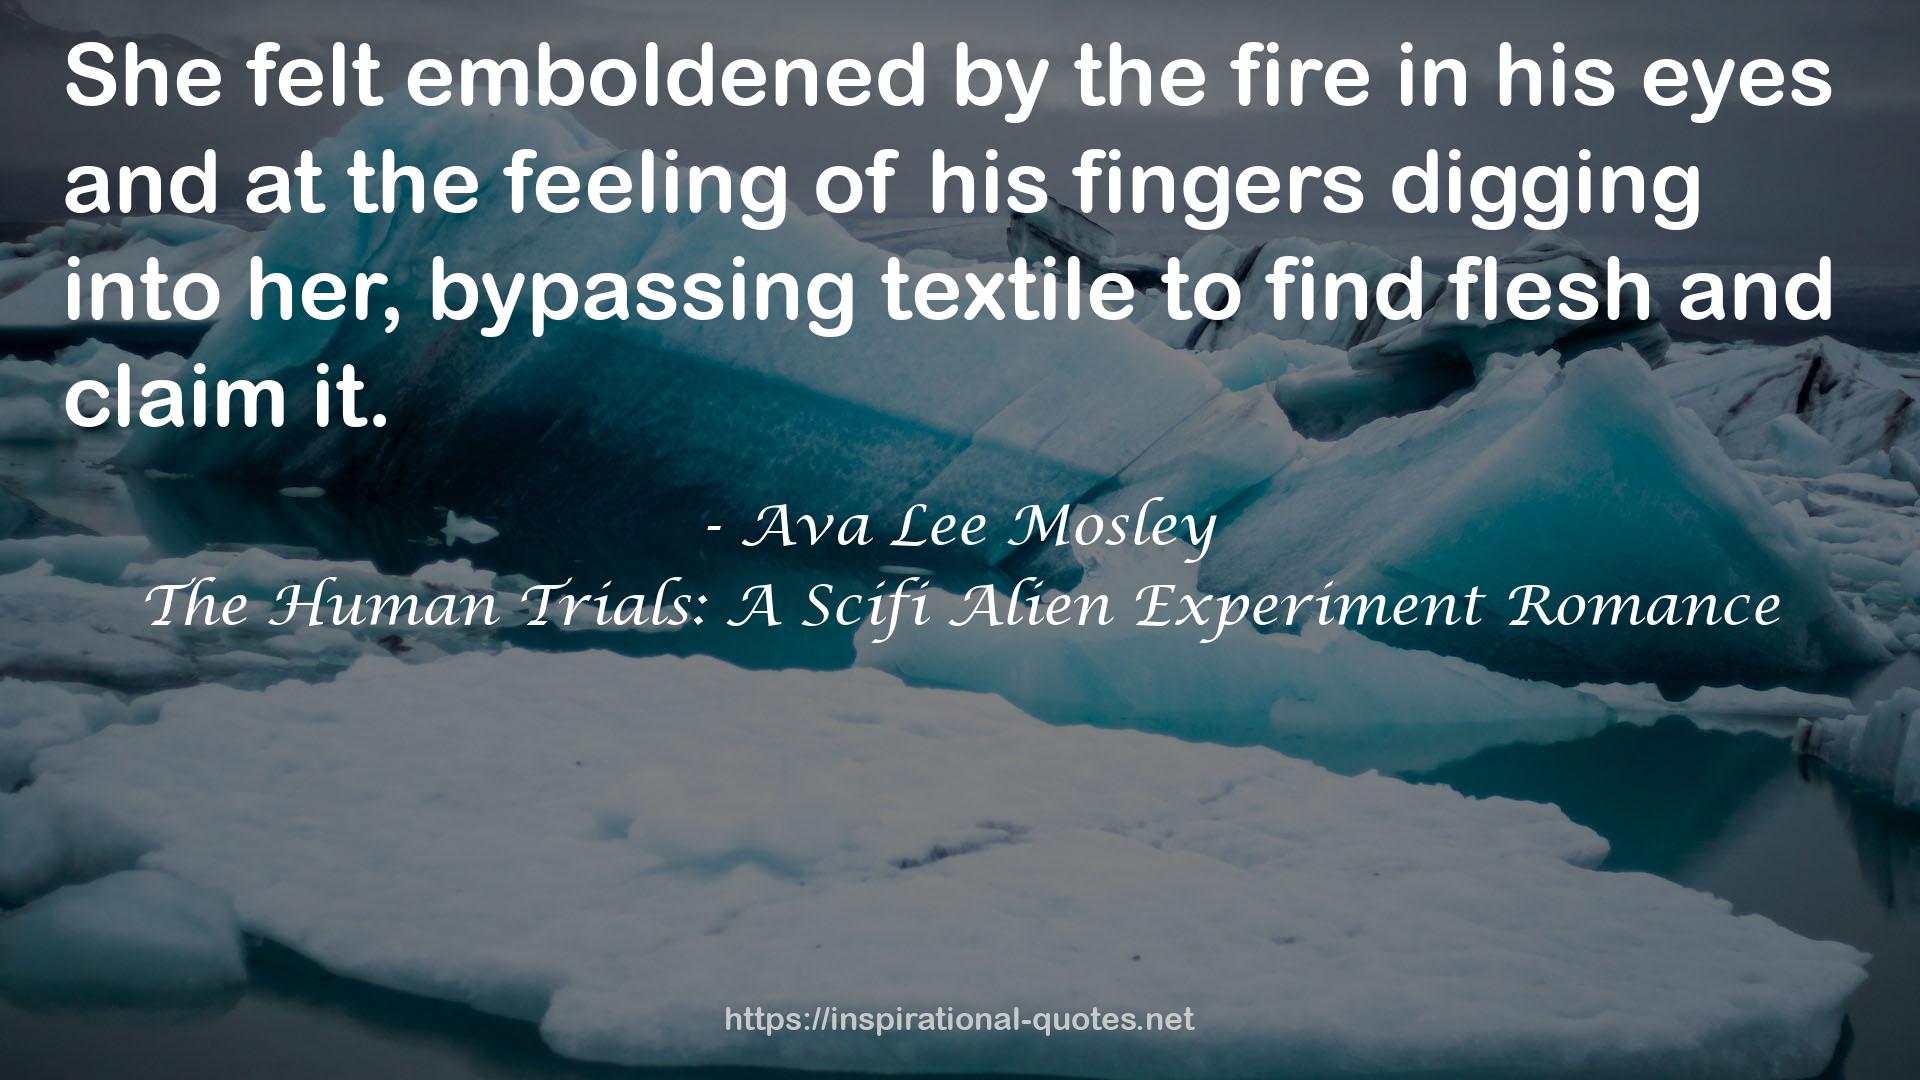 Ava Lee Mosley QUOTES